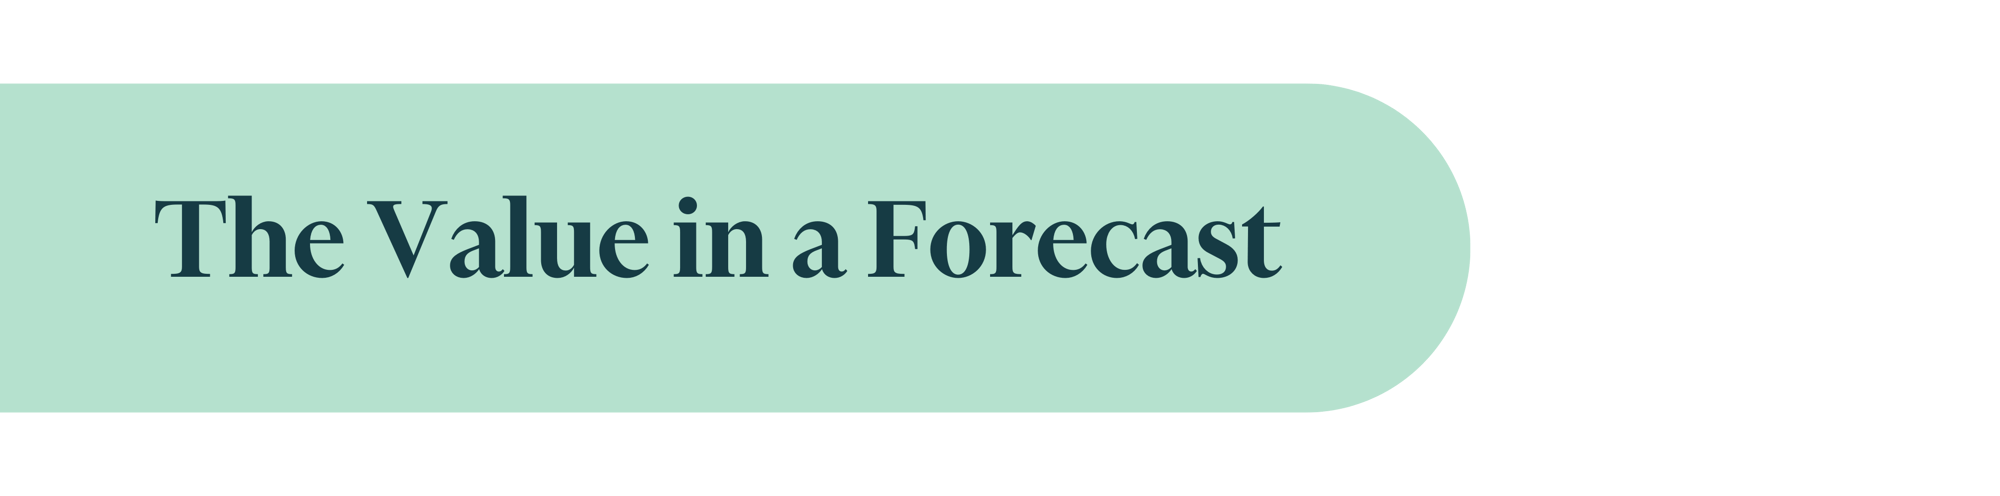 The Value in  a Forecast (1)